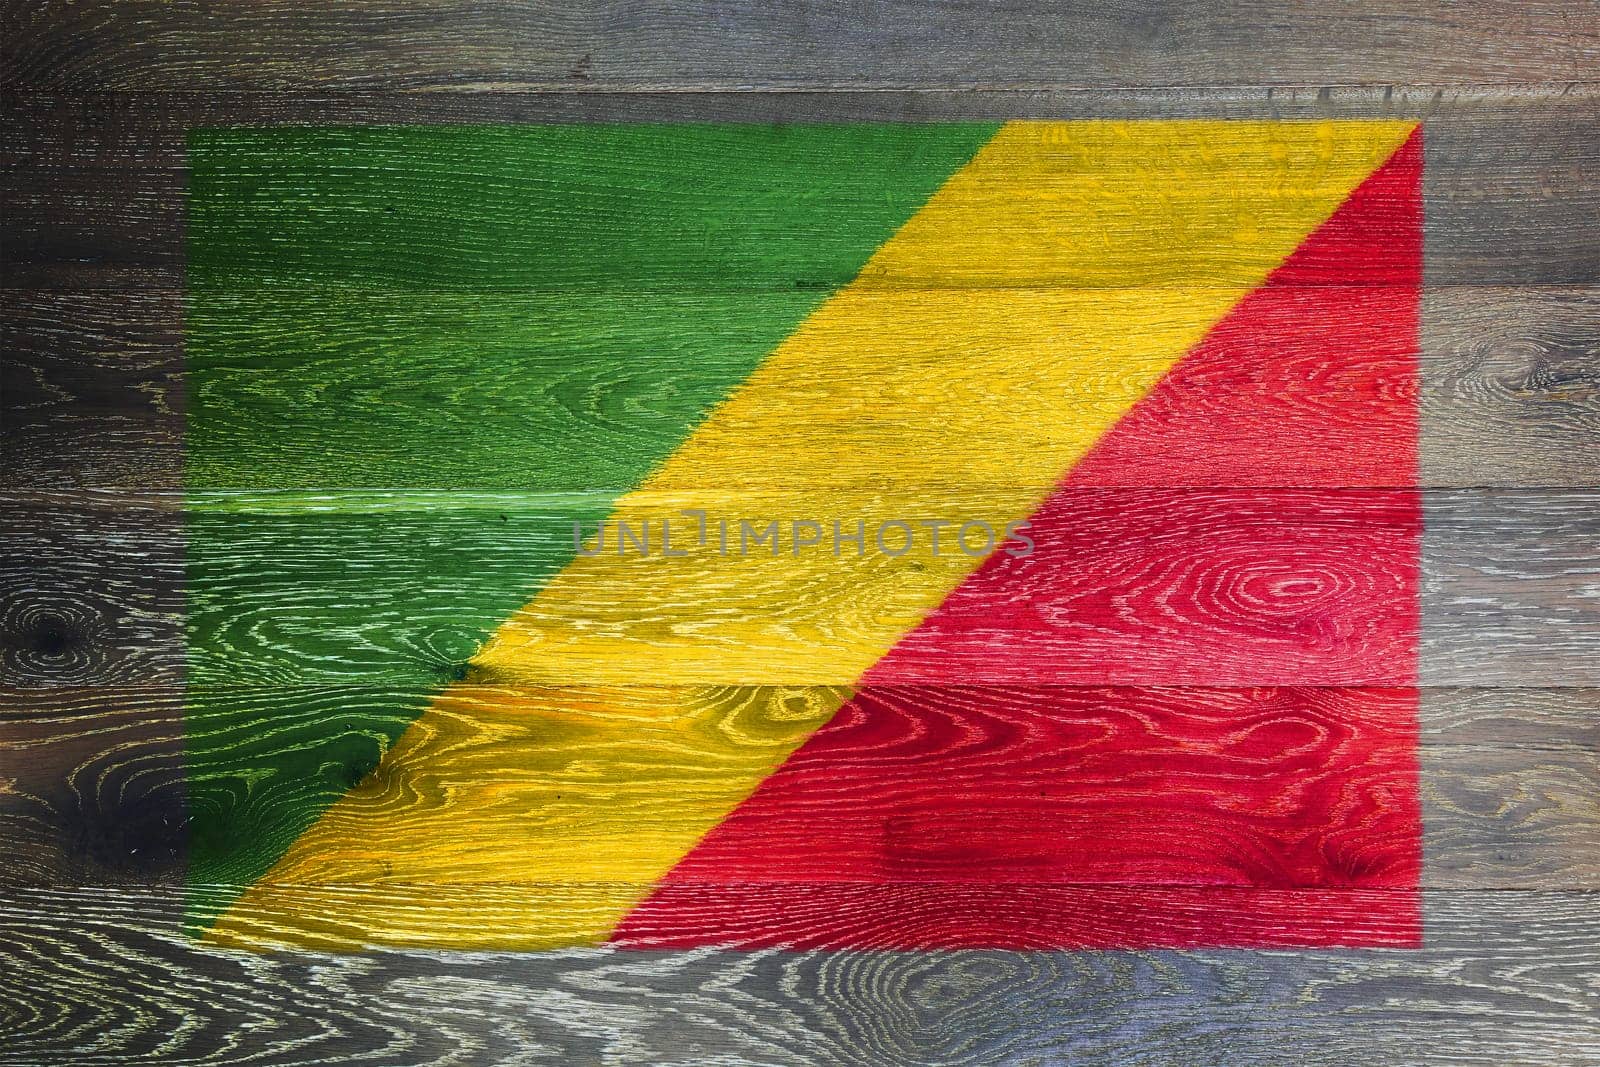 Republic of Congo flag on rustic old wood surface background